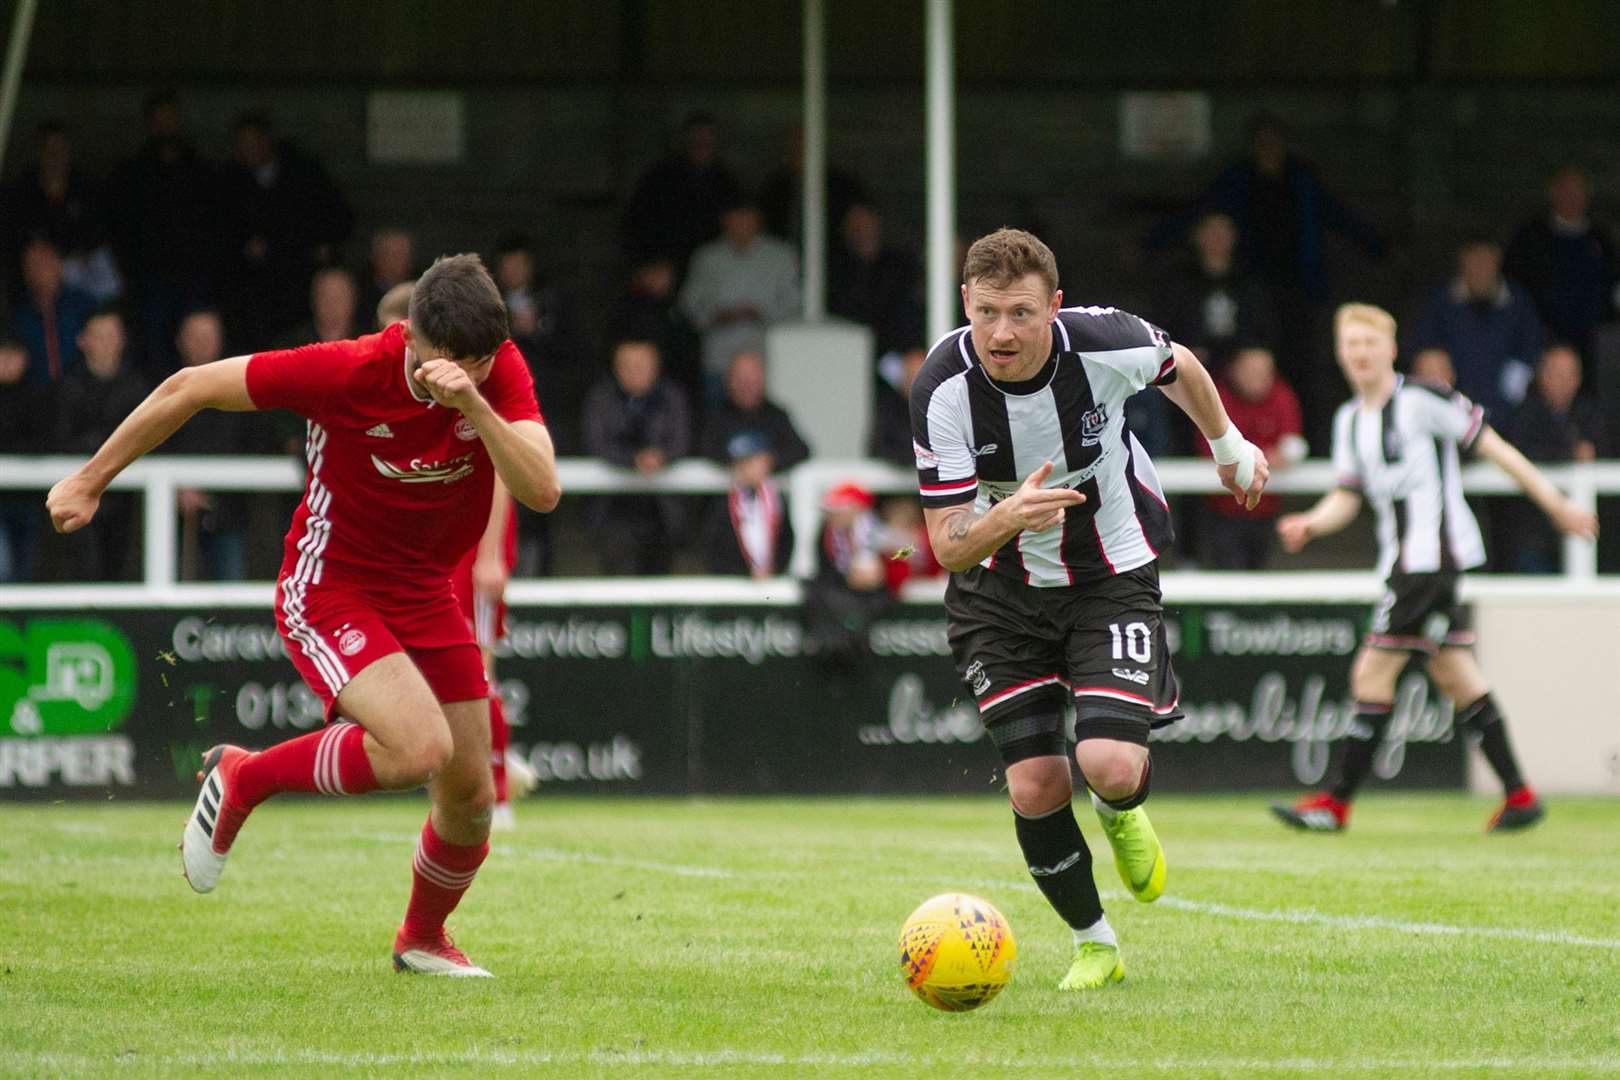 Shane Sutherland in action for Elgin City. He had scored 26 goals for the Borough Briggs club before the campaign was brought to an end. Picture: Daniel Forsyth